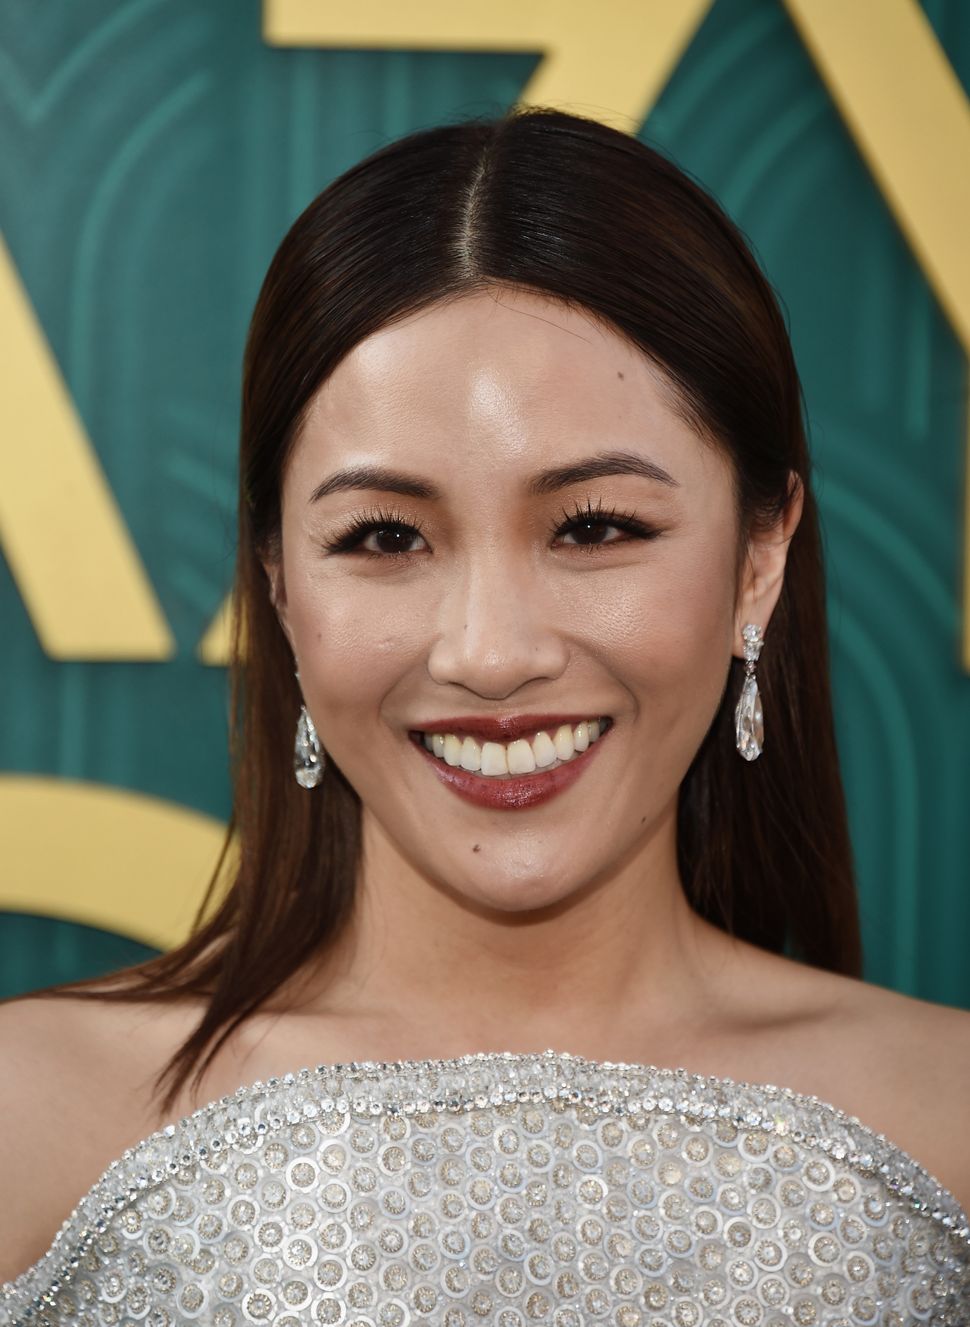 Constance Wu plays Jessica Huang in the hit US series 'Fresh Off The Boat'.